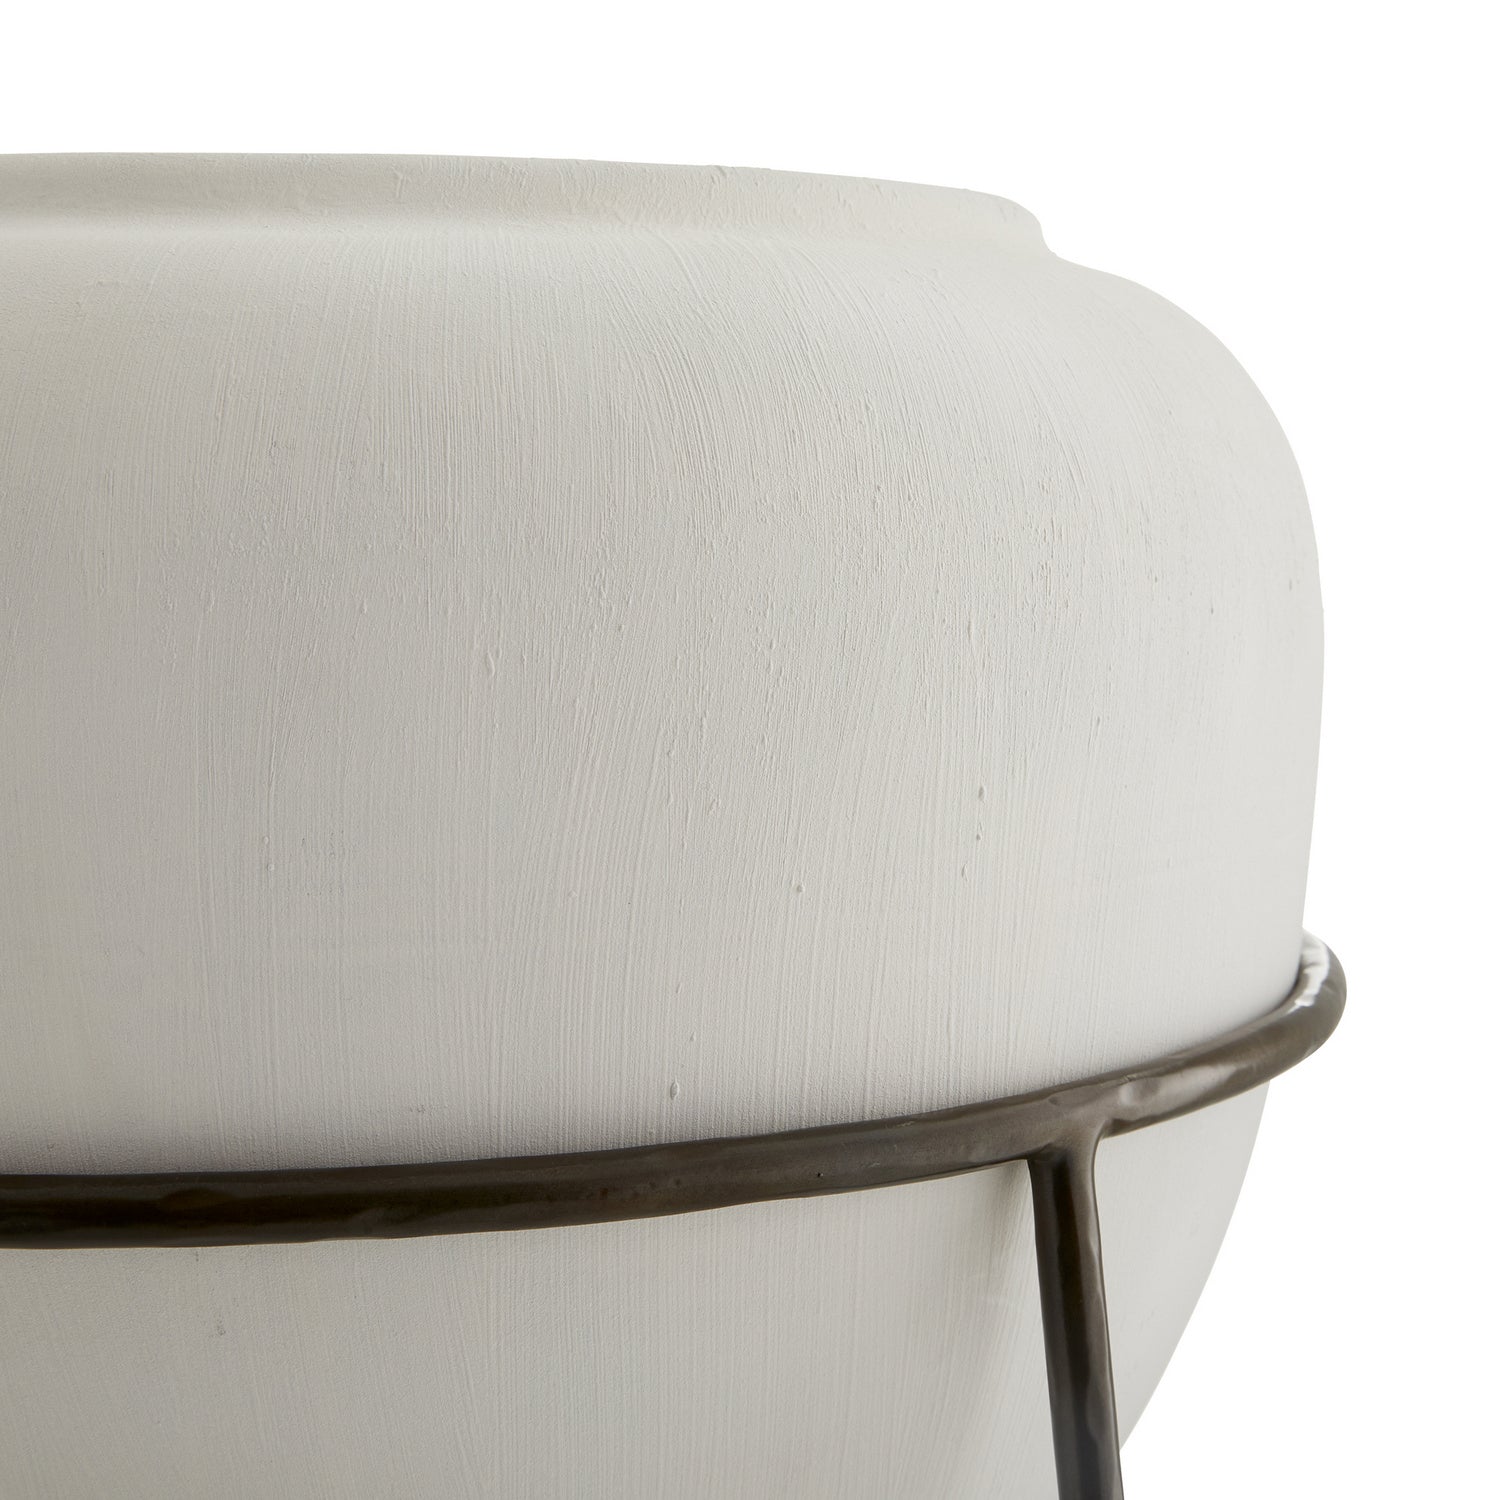 Floor Urn from the Marcello collection in Matte White finish